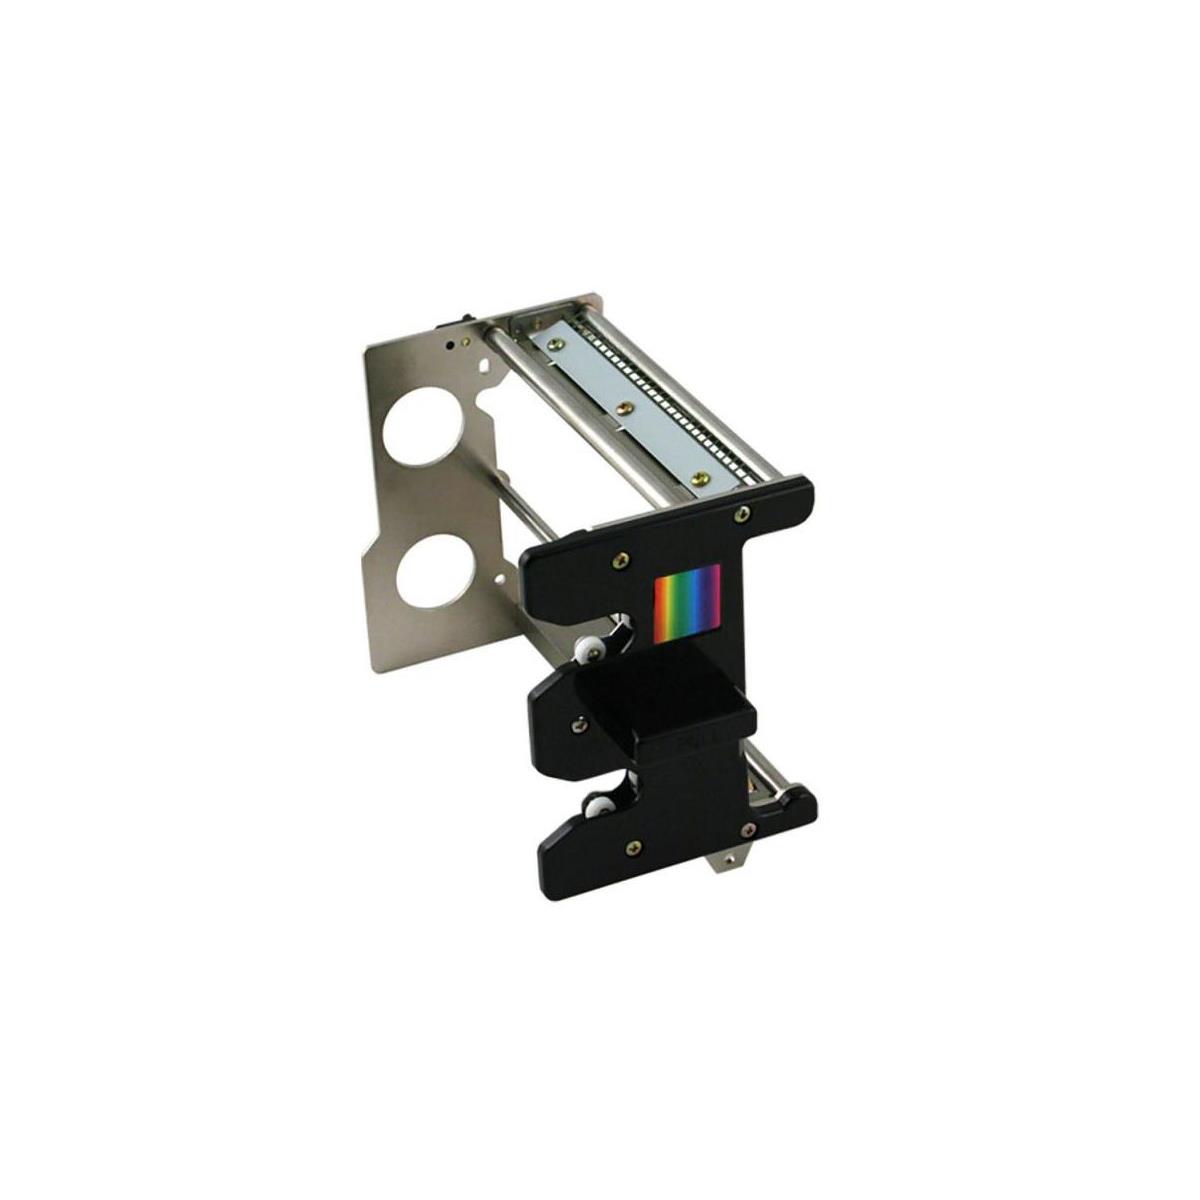 Image of Microboards Technology P-55 Thermal Printer Cartridge for Photo/Color Ribbon